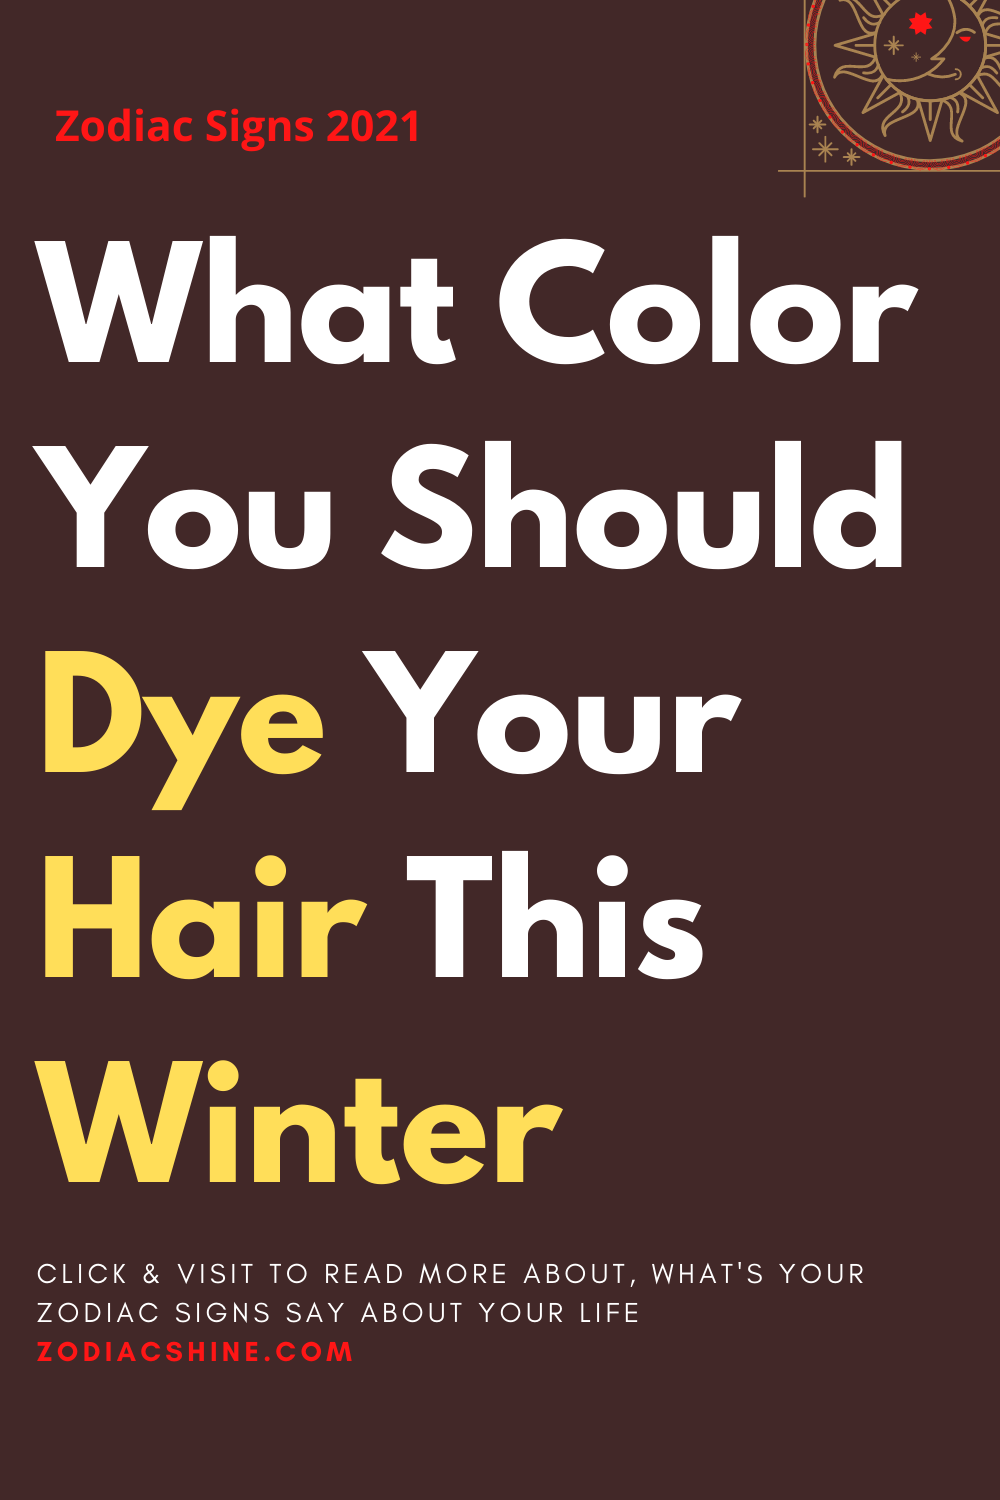 What Color You Should Dye Your Hair This Winter